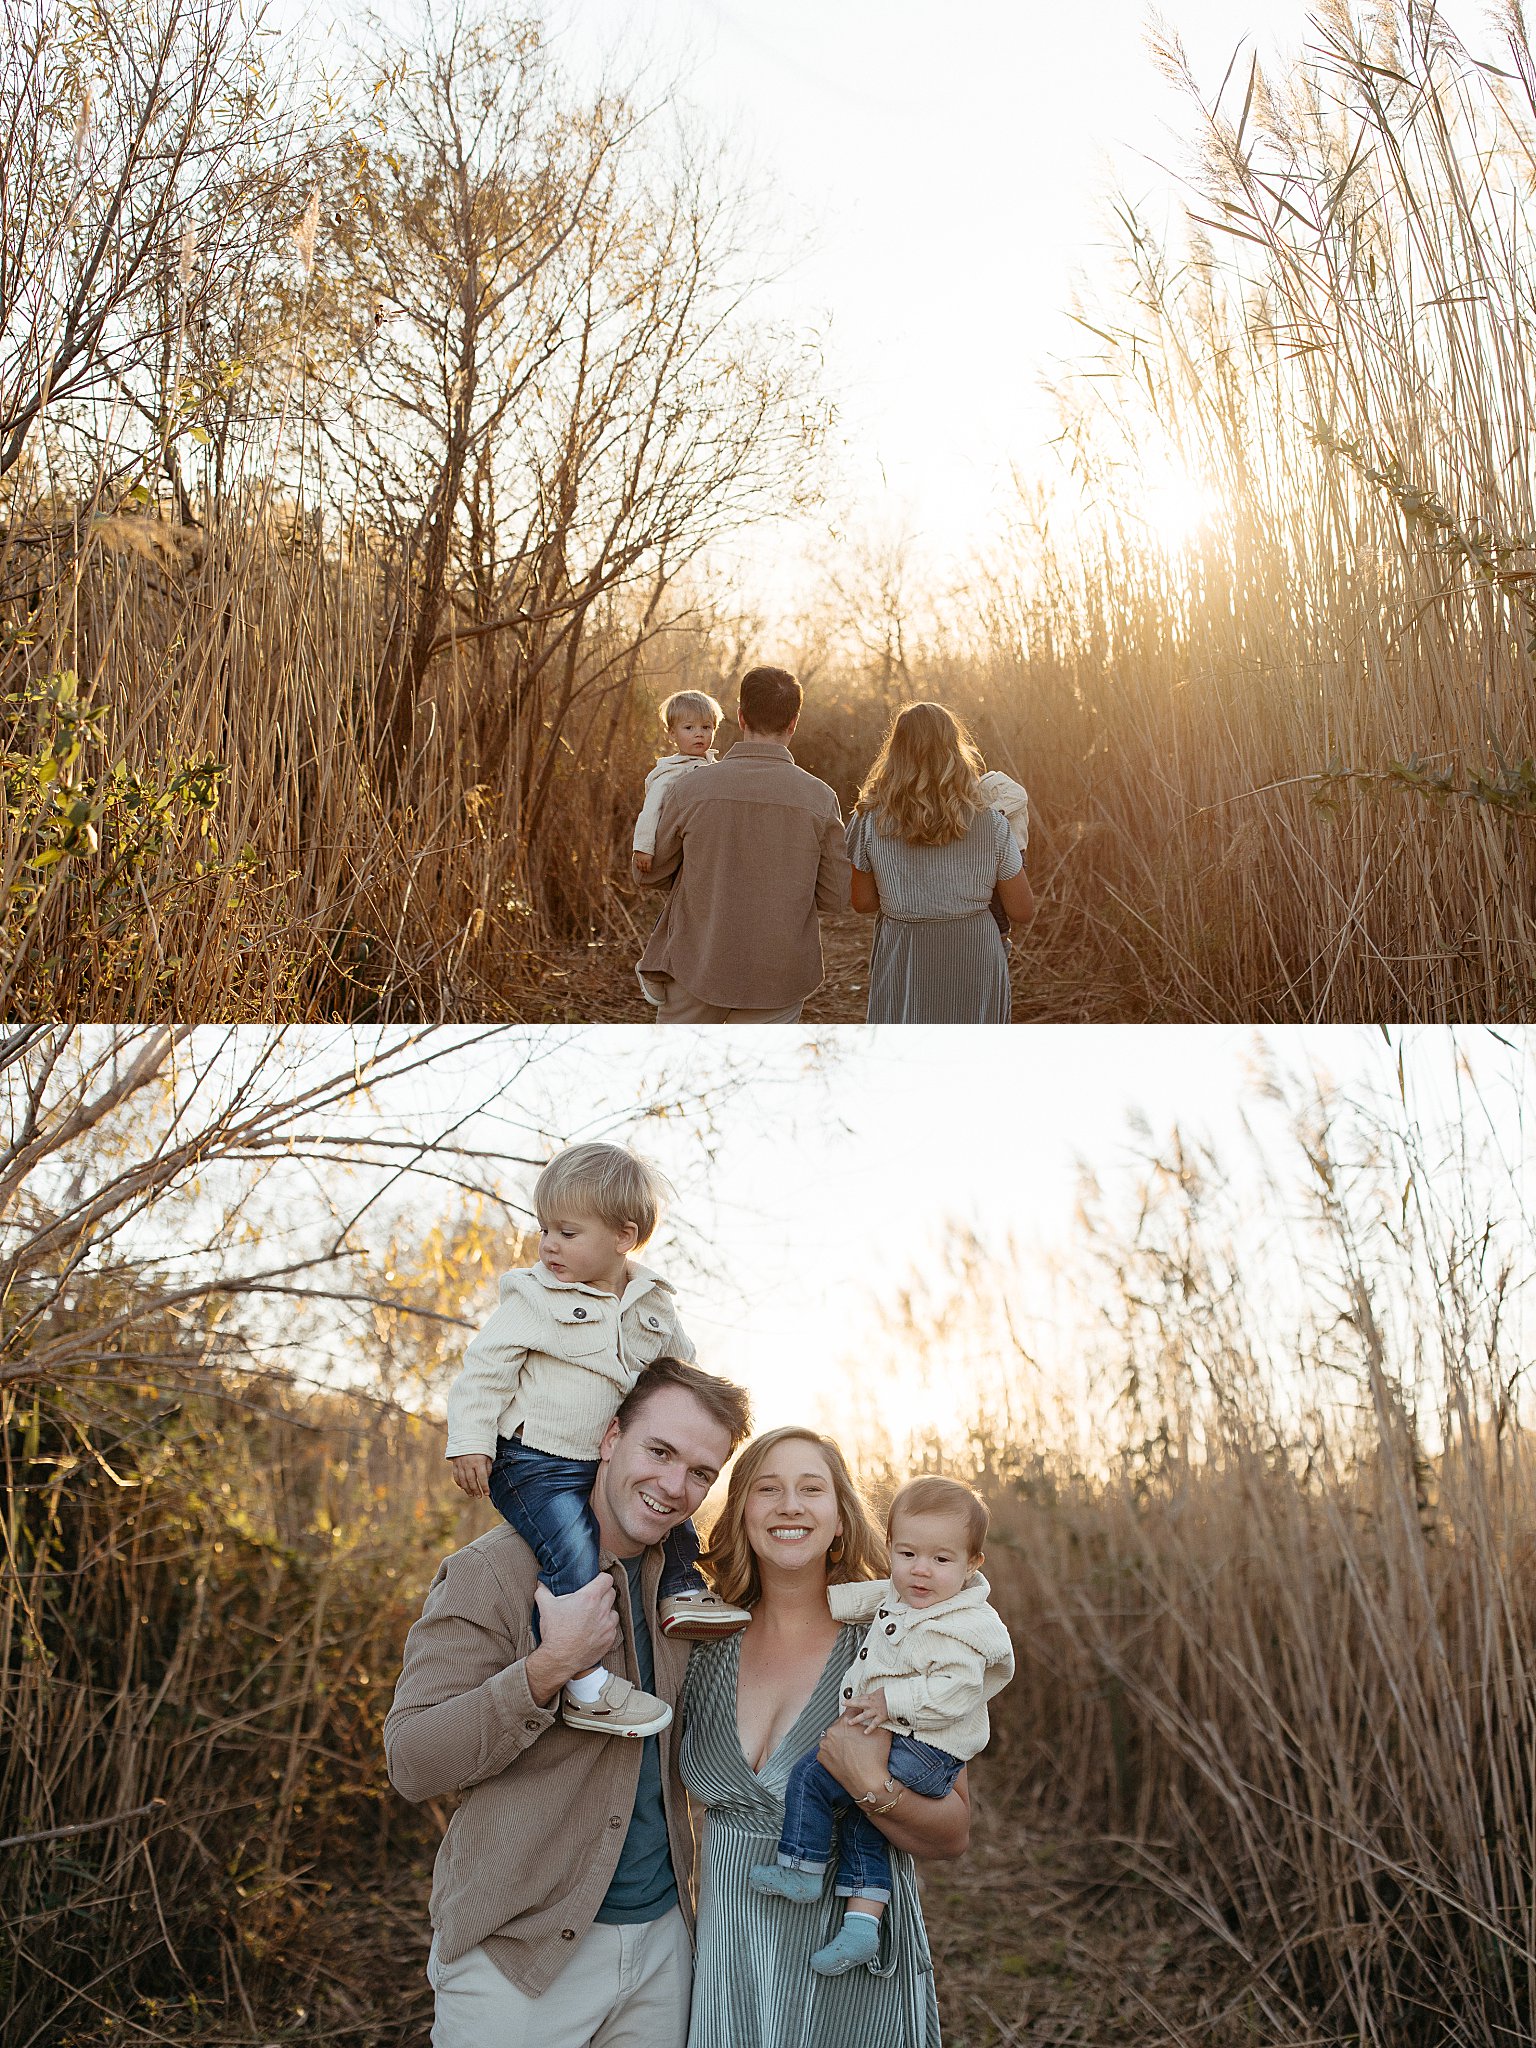 parents carry children as they walk toward setting sun by Nikki Meer Photography